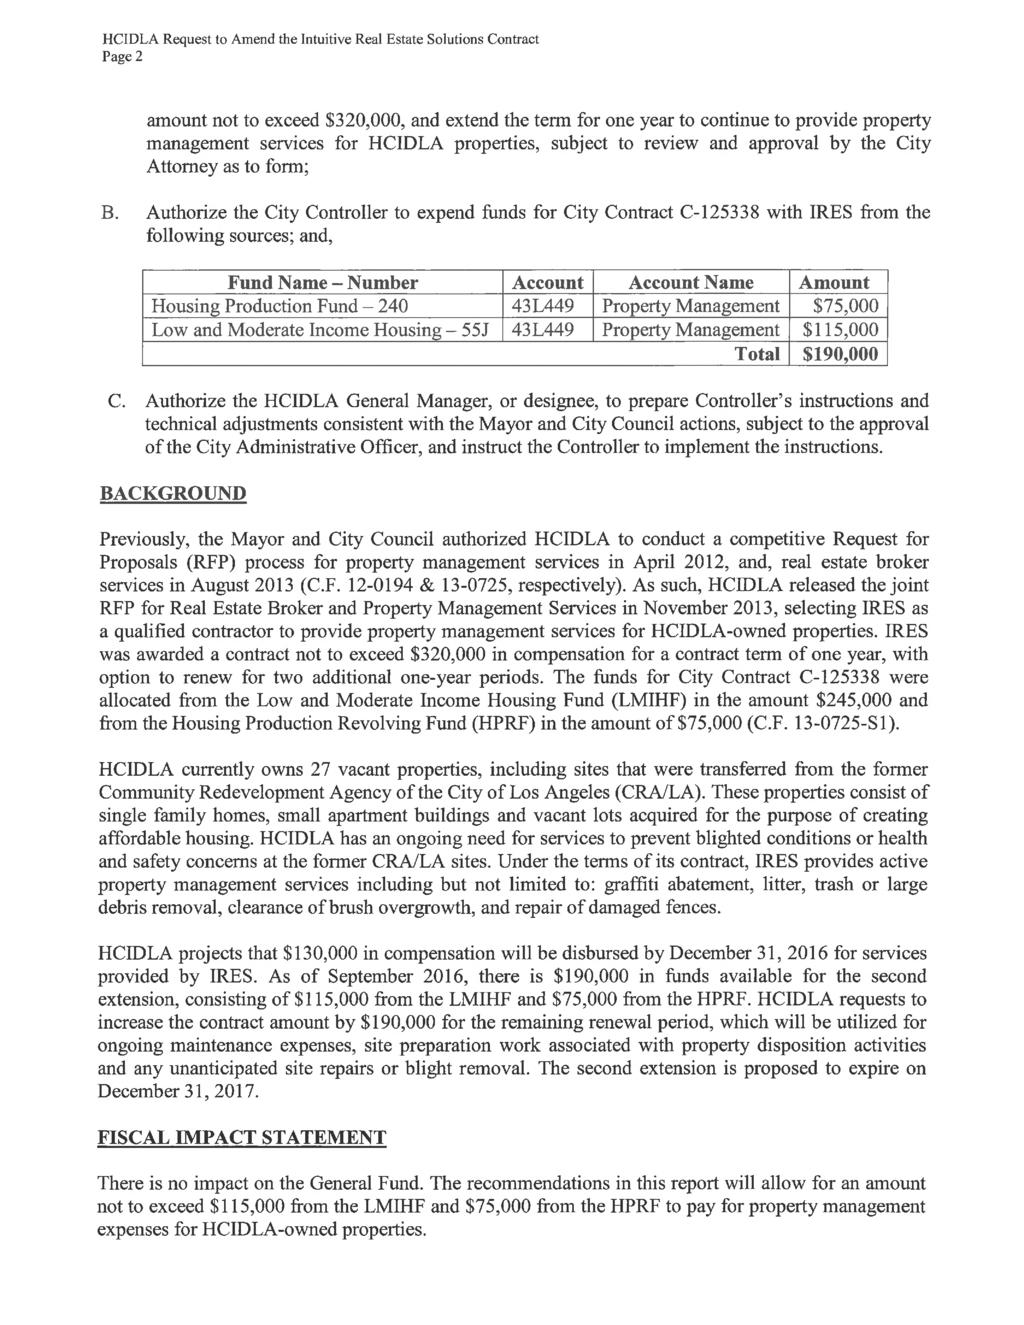 Page 2 amount not to exceed $320,000, and extend the term for one year to continue to provide property management services for HCIDLA properties, subject to review and approval by the City Attorney